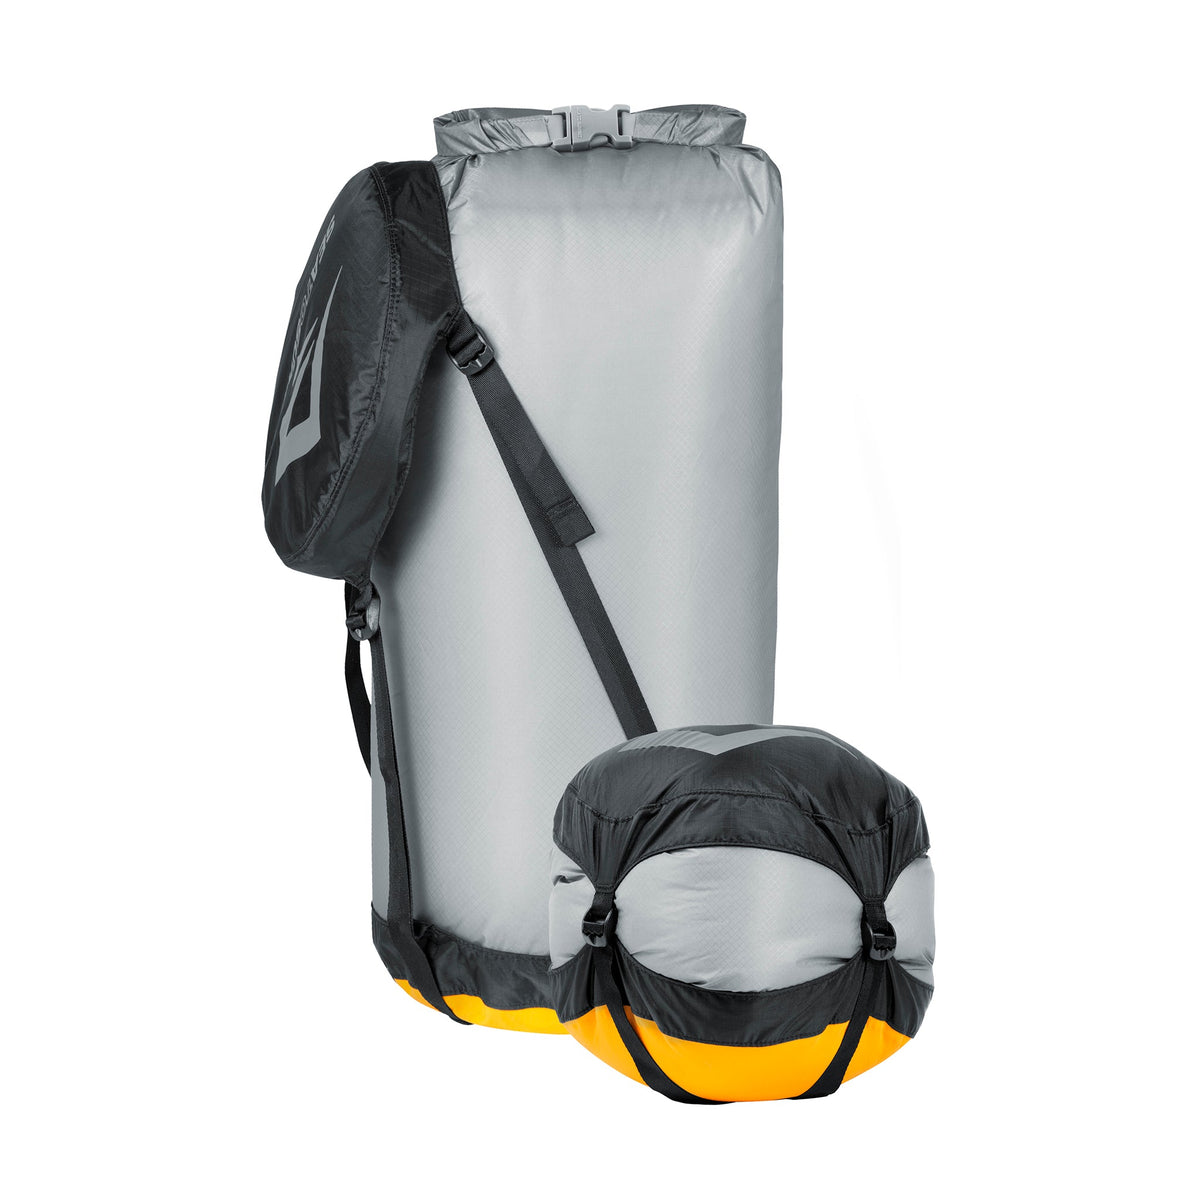 14 Liter || Ultra-Sil Compression Dry Sack in Grey